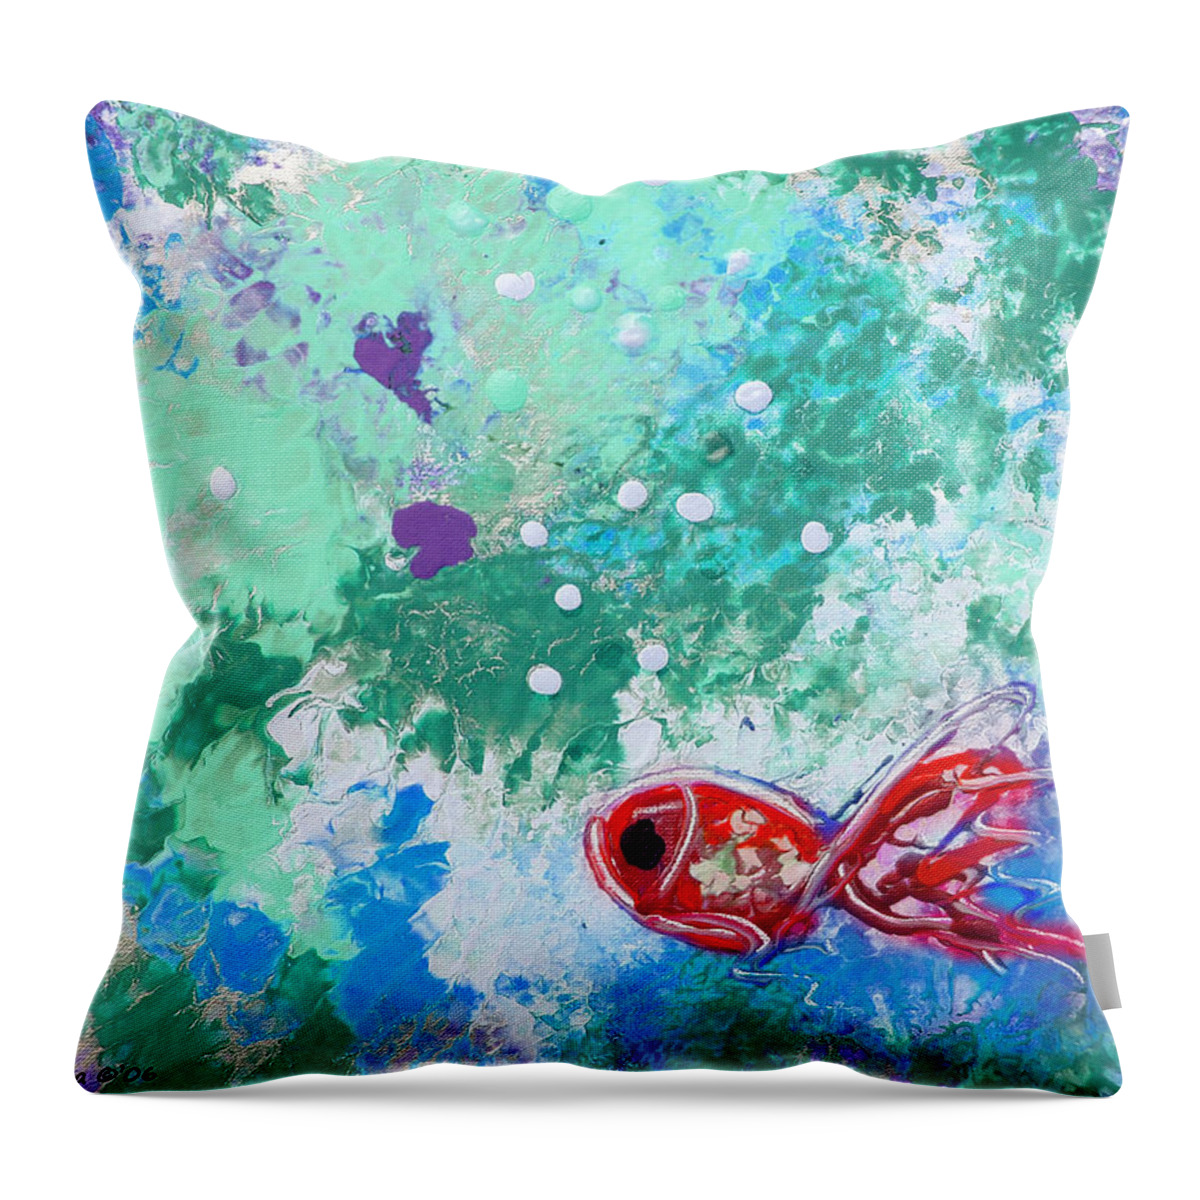 Fish Throw Pillow featuring the painting 1 Red Fish by Gina De Gorna